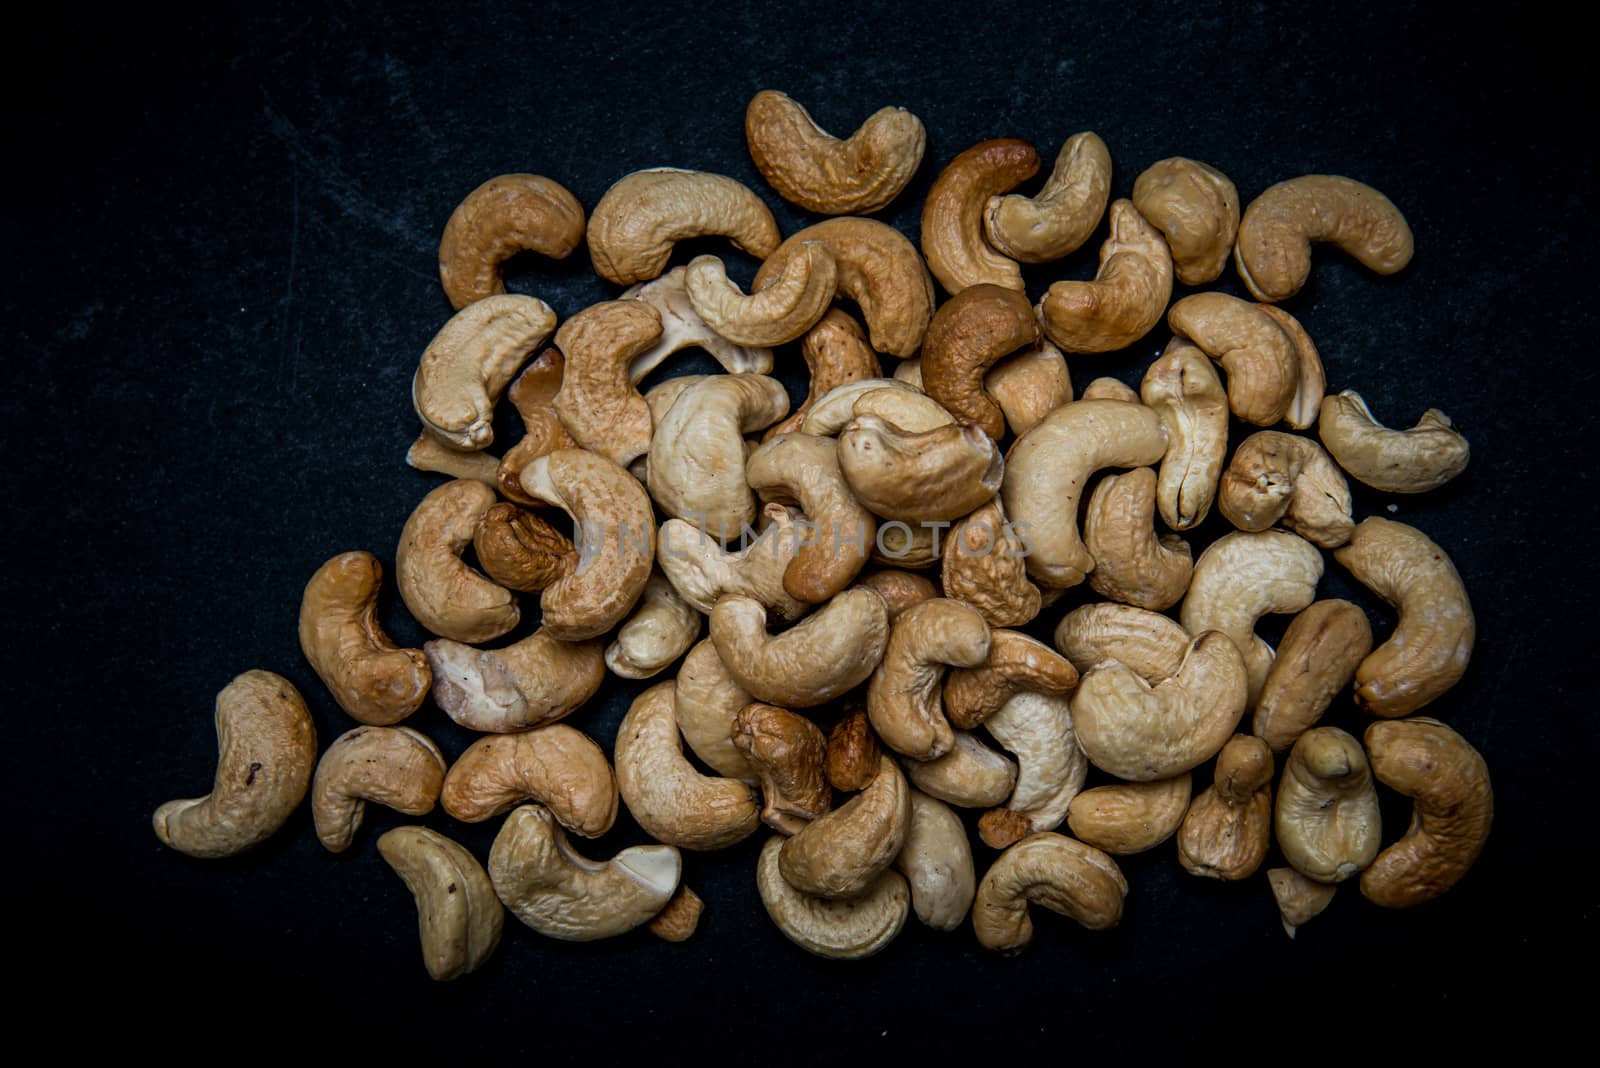 lots of fried cashews nuts scattered on grey background with copy space by marynkin